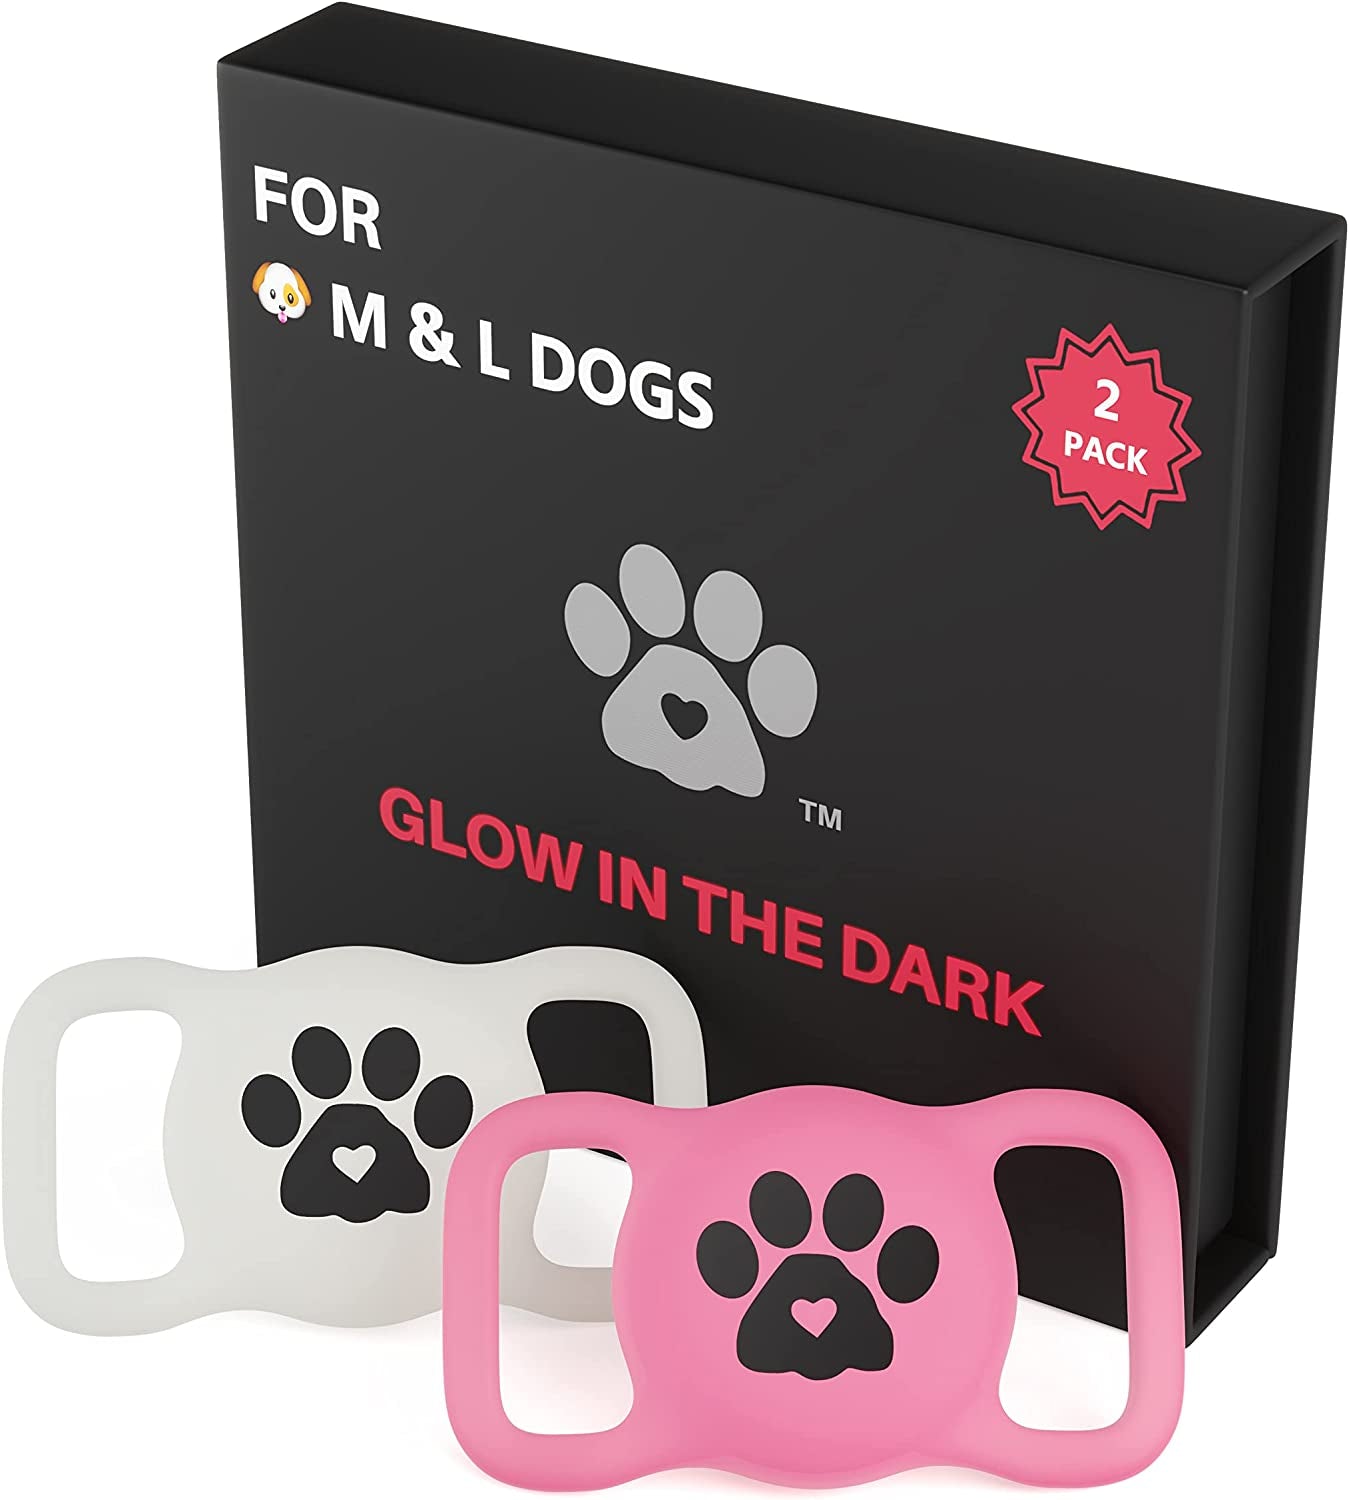 Airtag Dog Collar Holder – Available in Several Colors & Sizes - 2 Pack Silicone Dog Airtag Holder - Premium Dog Collar Airtag Holder - Apple Airtag Dog Collar Comfortably Fits Dogs & Cats Too! Electronics > GPS Accessories > GPS Cases LUVKO FAMILY Classic- M & L Dog, Light Pink & White (Glow In The Dark)  